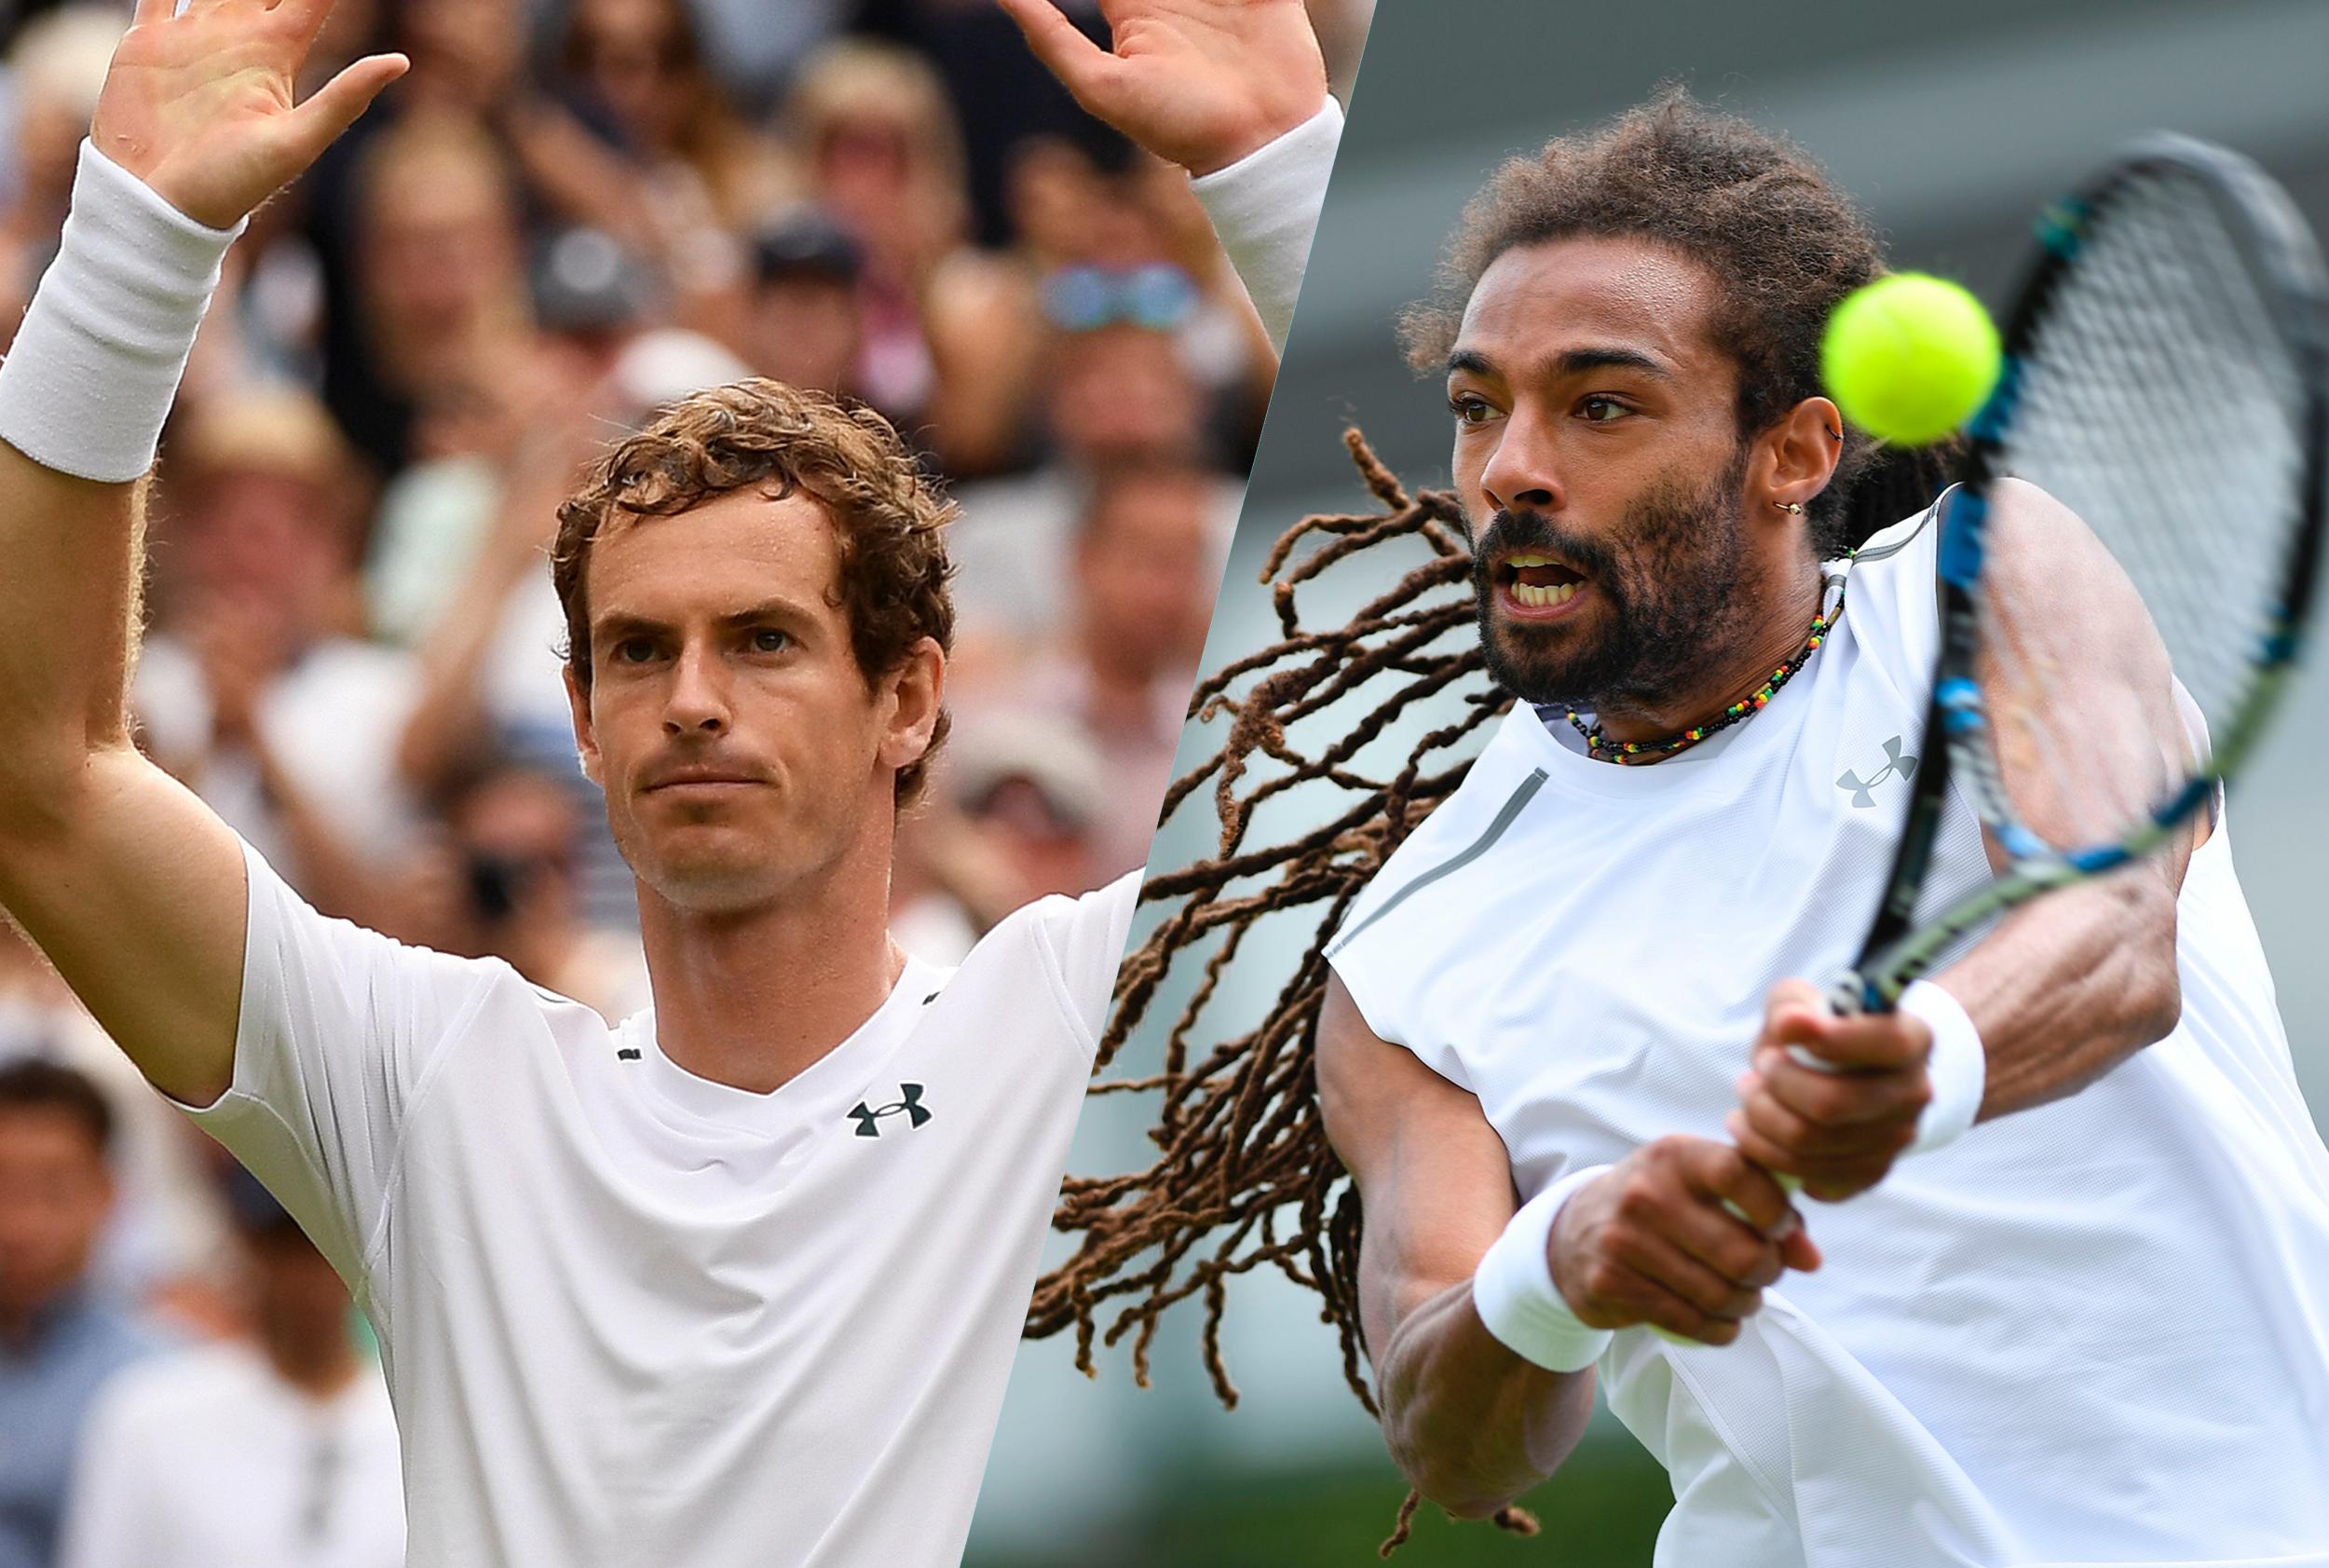 Andy Murray takes on Jamaican-German Dustin Brown on Centre Court